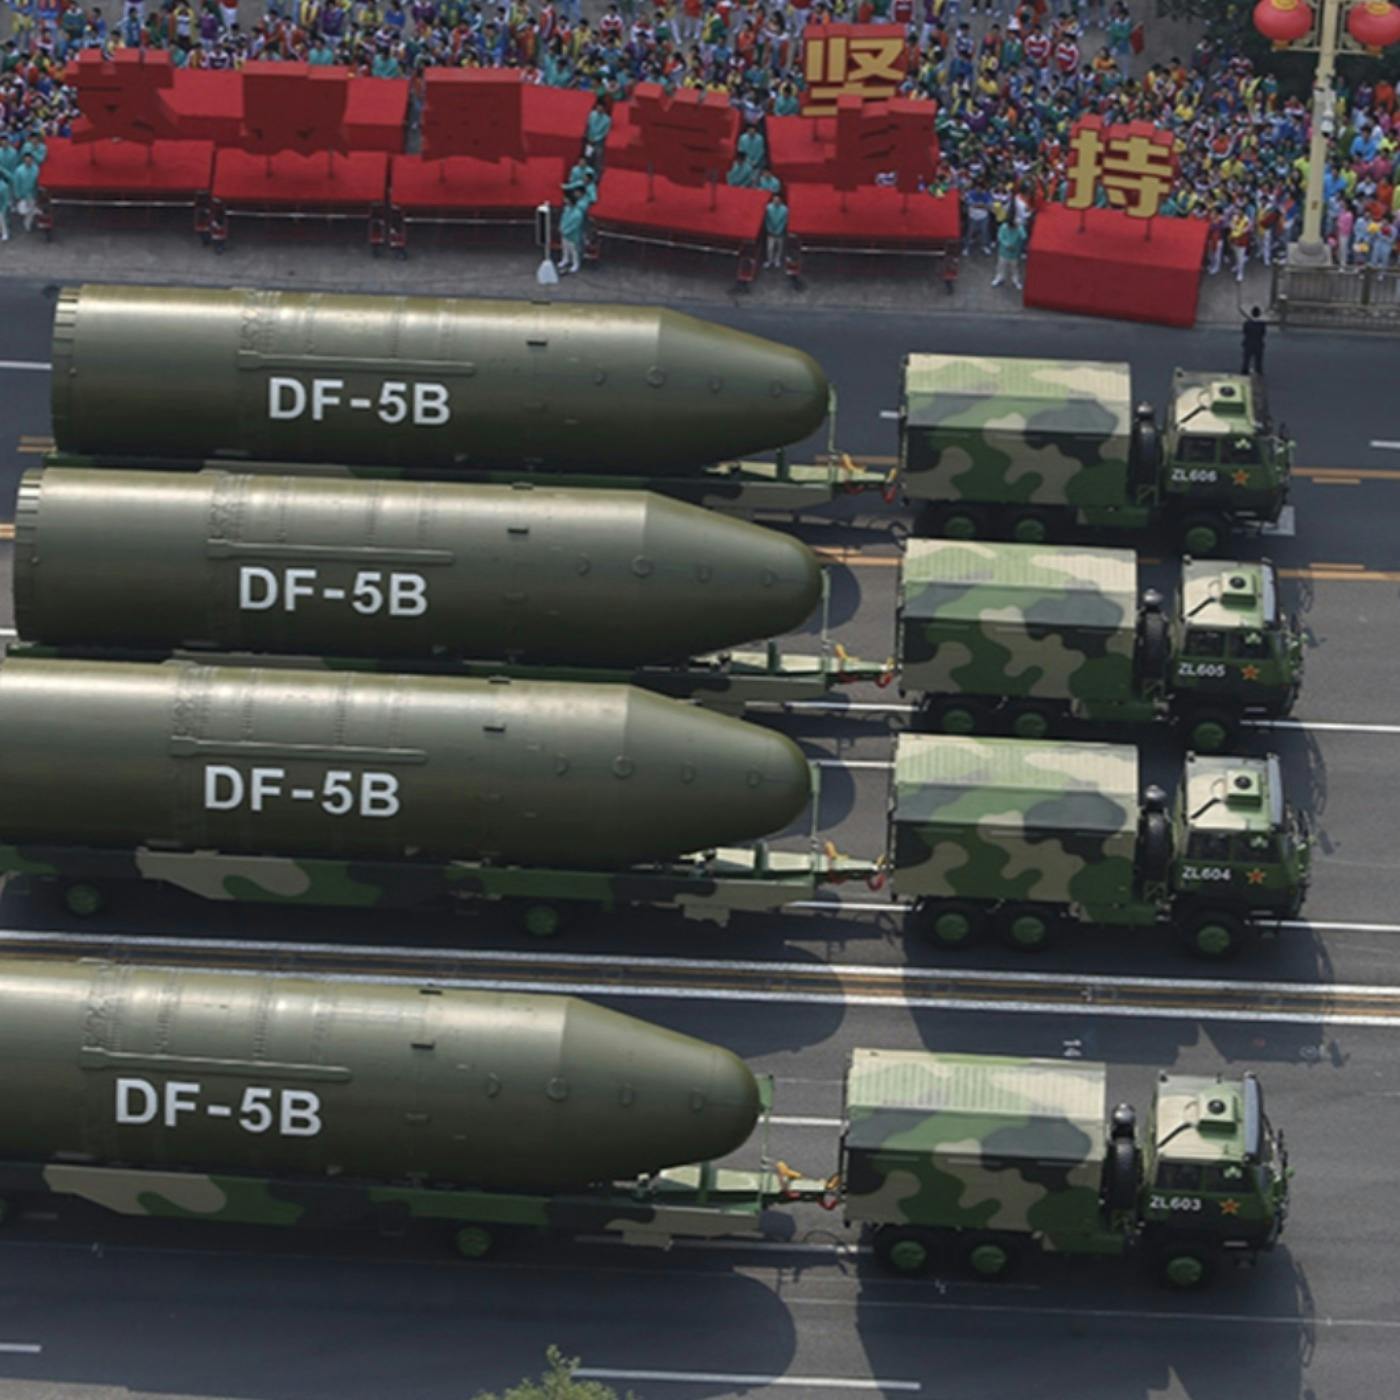 China/Russia + Why China's Making More Nukes